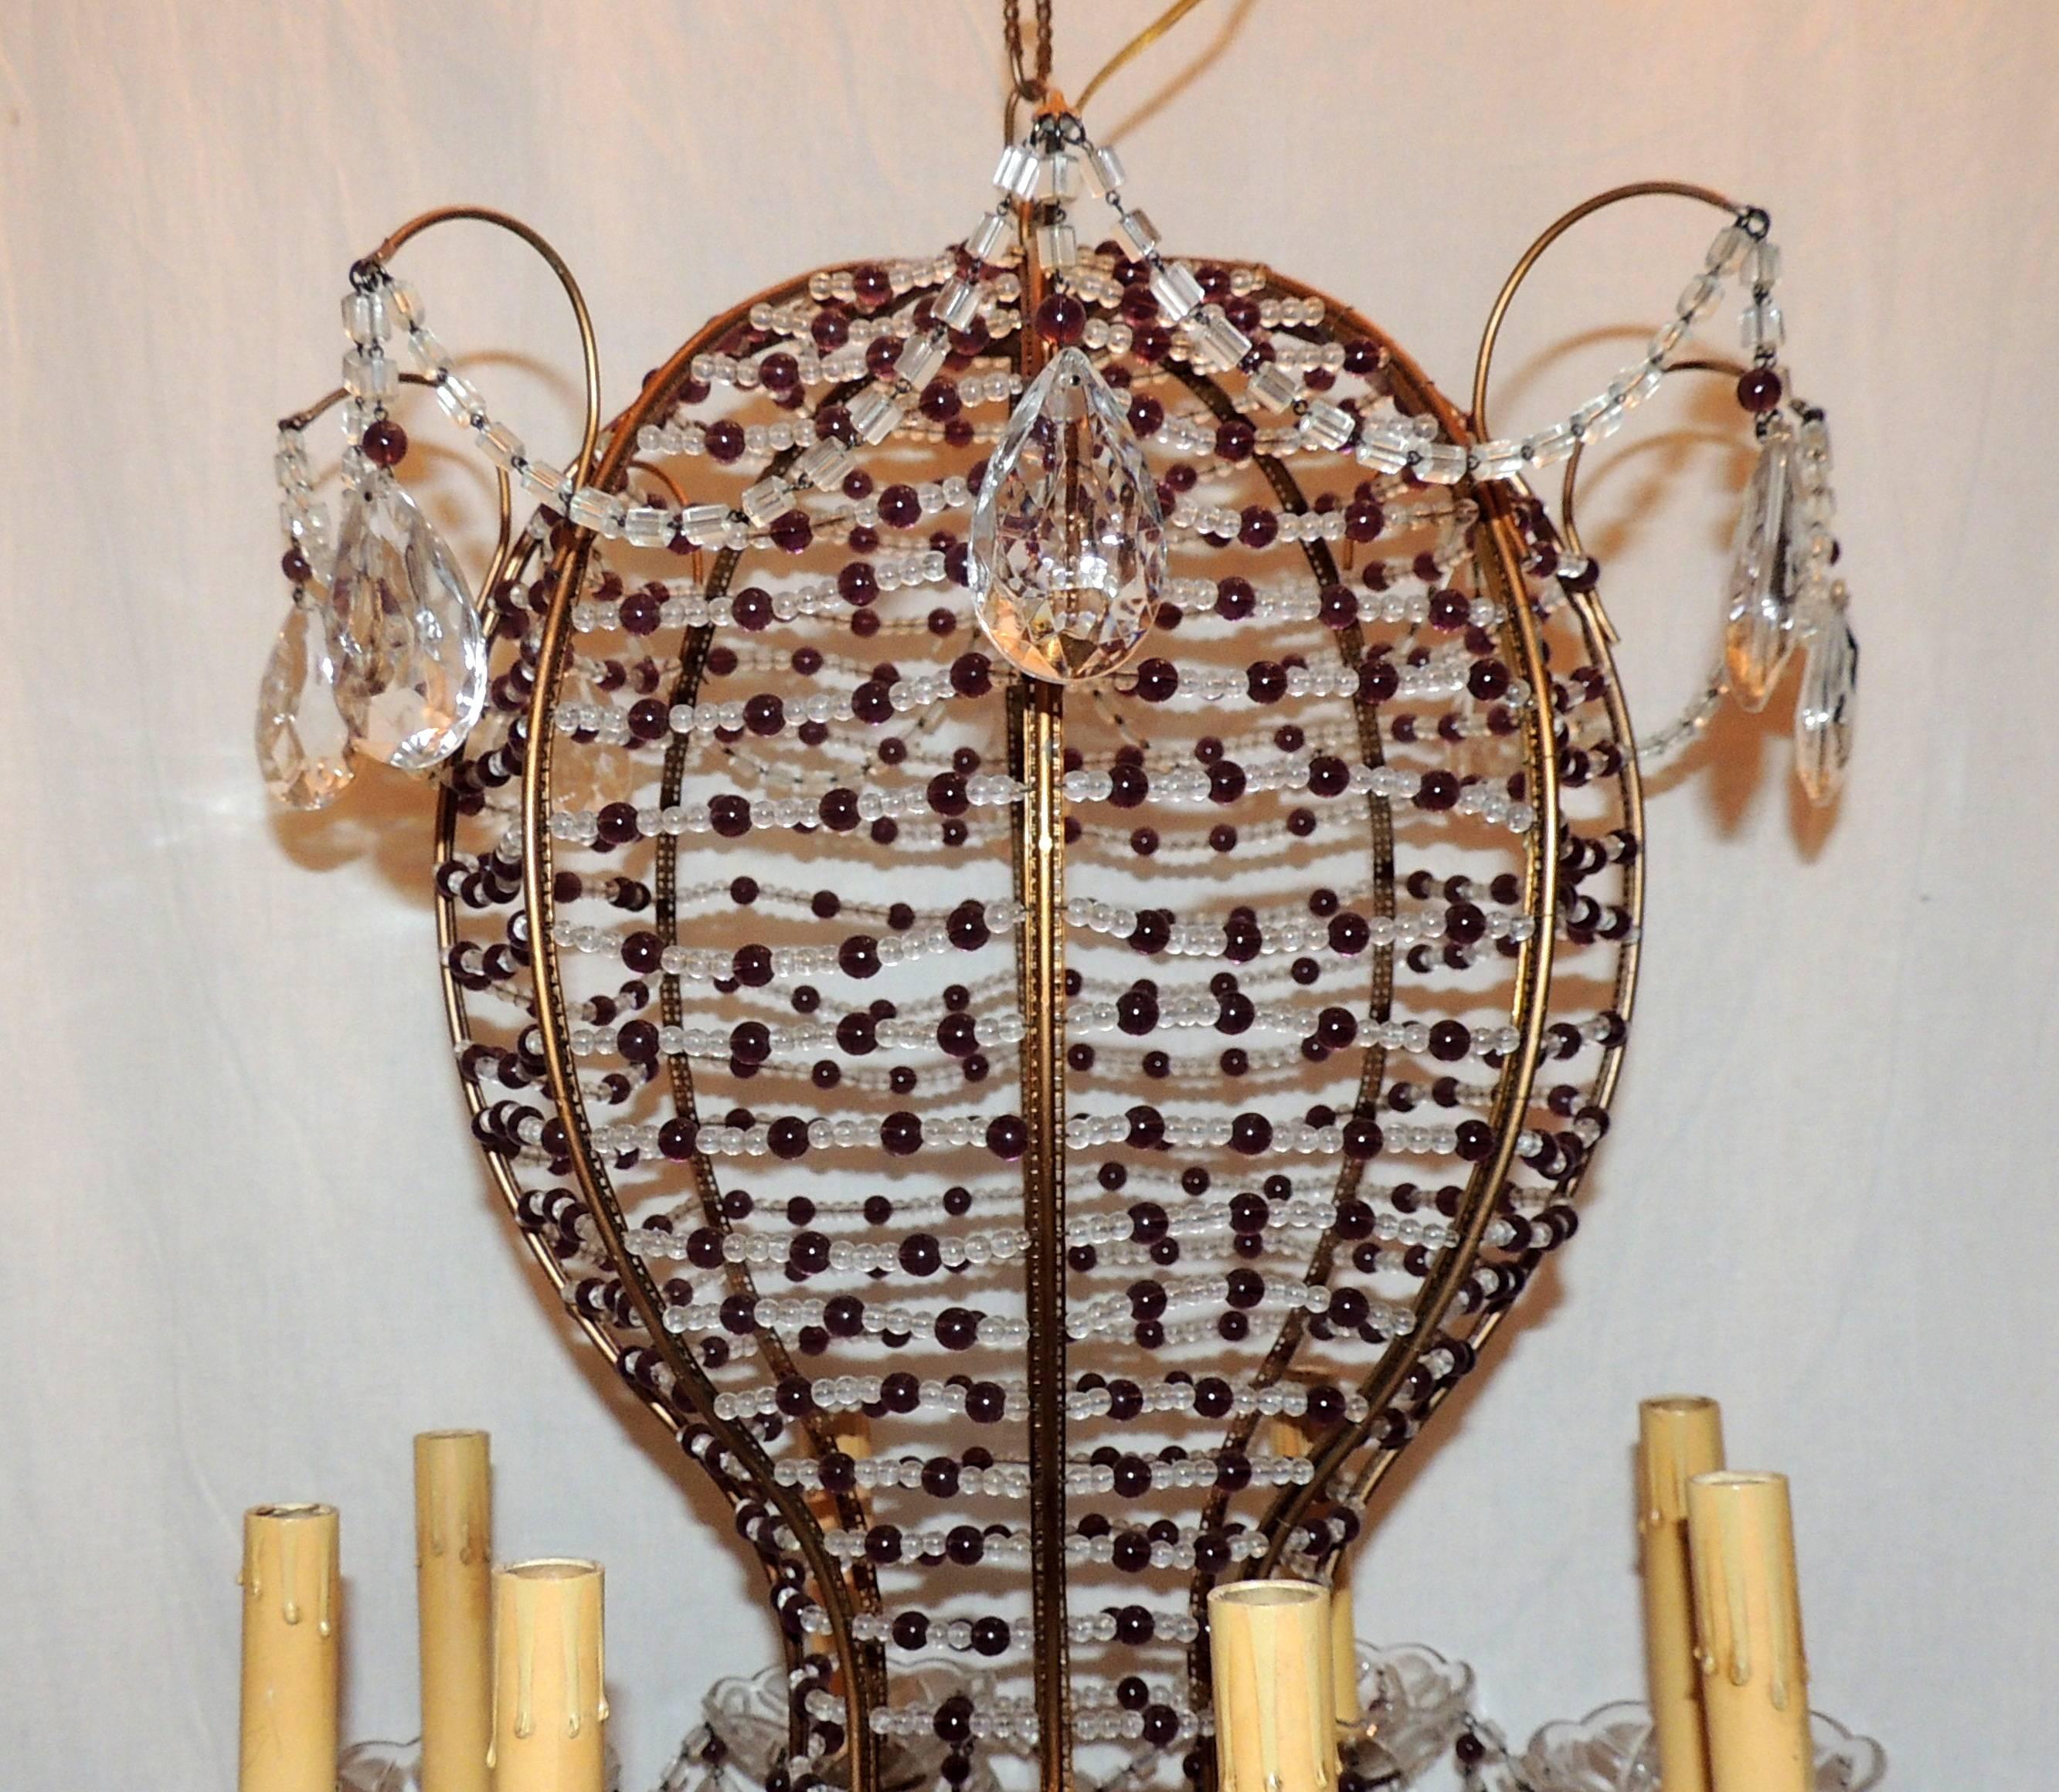 A fine beaded Italian amethyst purple and clear crystal hot air balloon chandelier light fixture with eight lights.